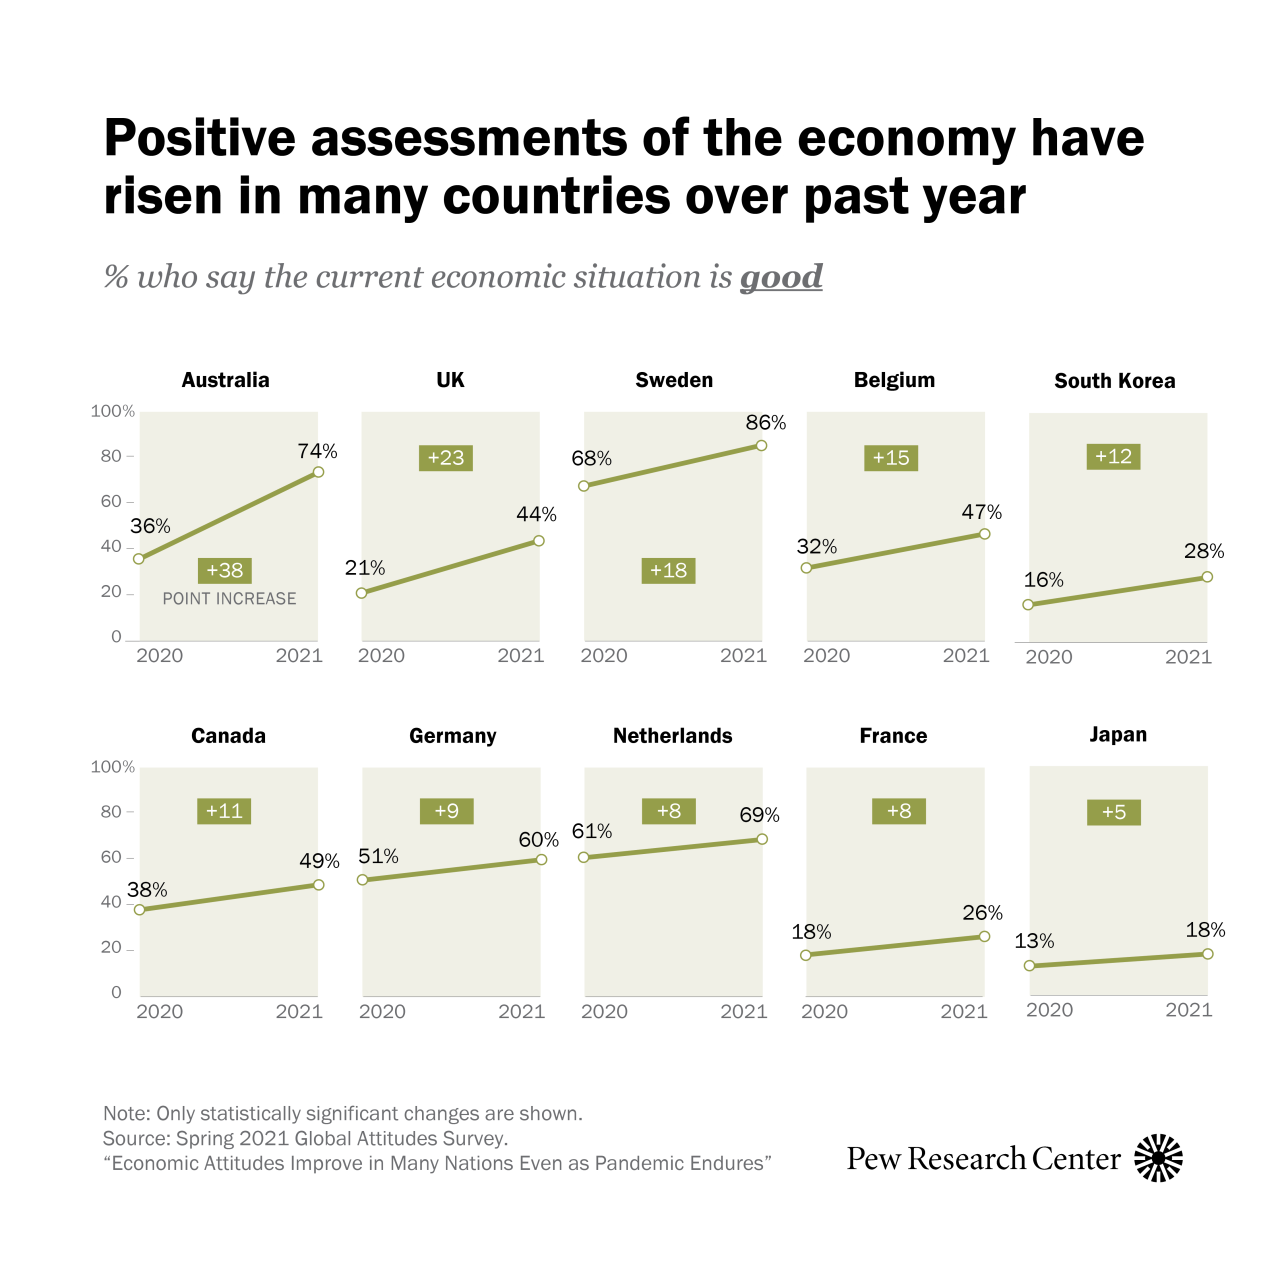 As the global economy shows signs of rebounding, positive assessments of the economic situation have risen in several major advanced economies since last year. Positive views of the economy have sharply increased in countries like Australia and the...